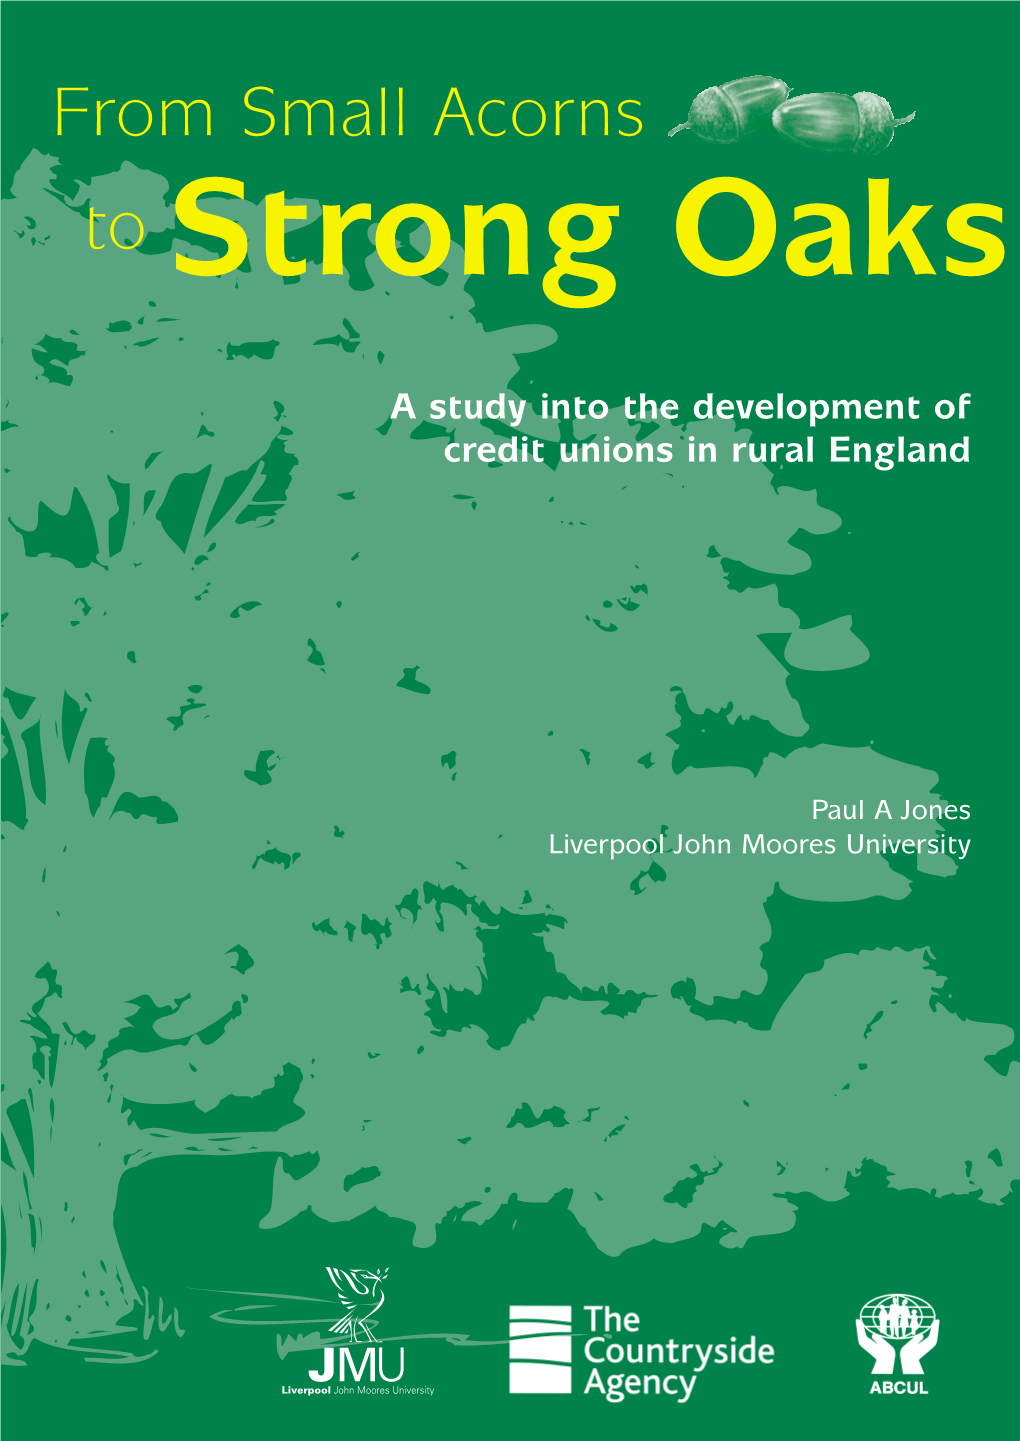 From Small Acorns to Strong Oaks